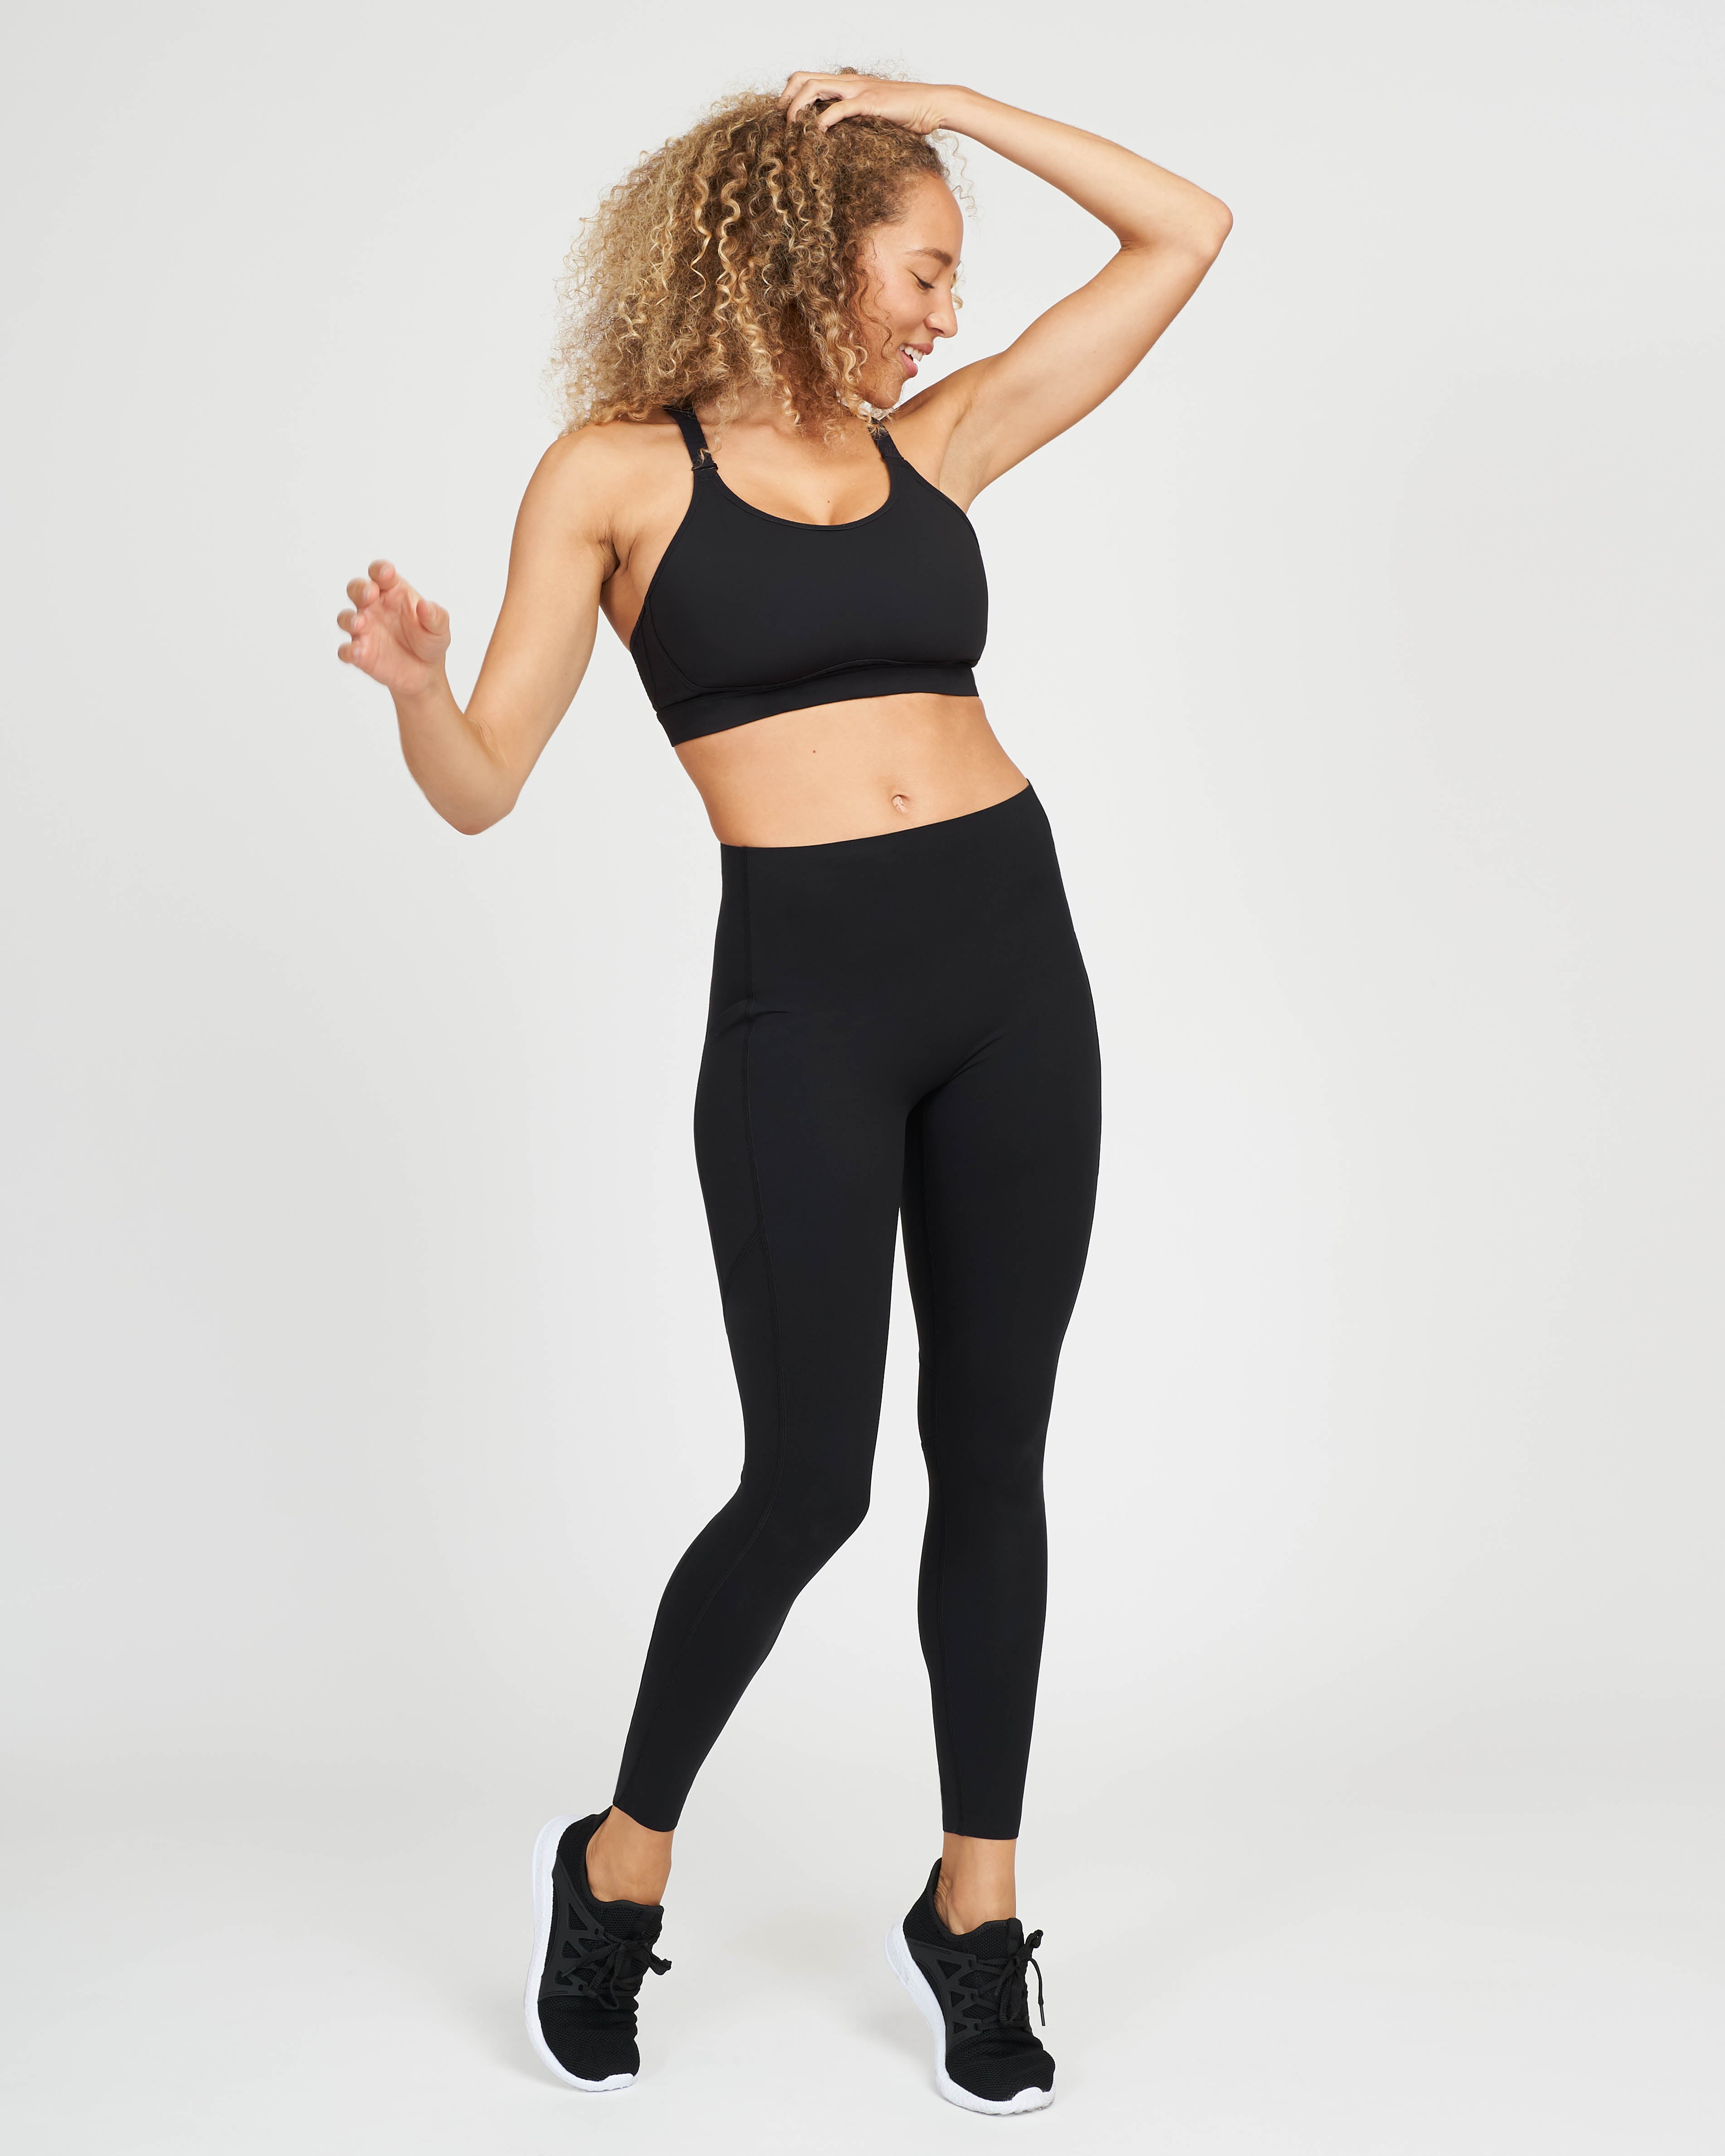 SPANX Solid Black Leggings Size XL - 55% off